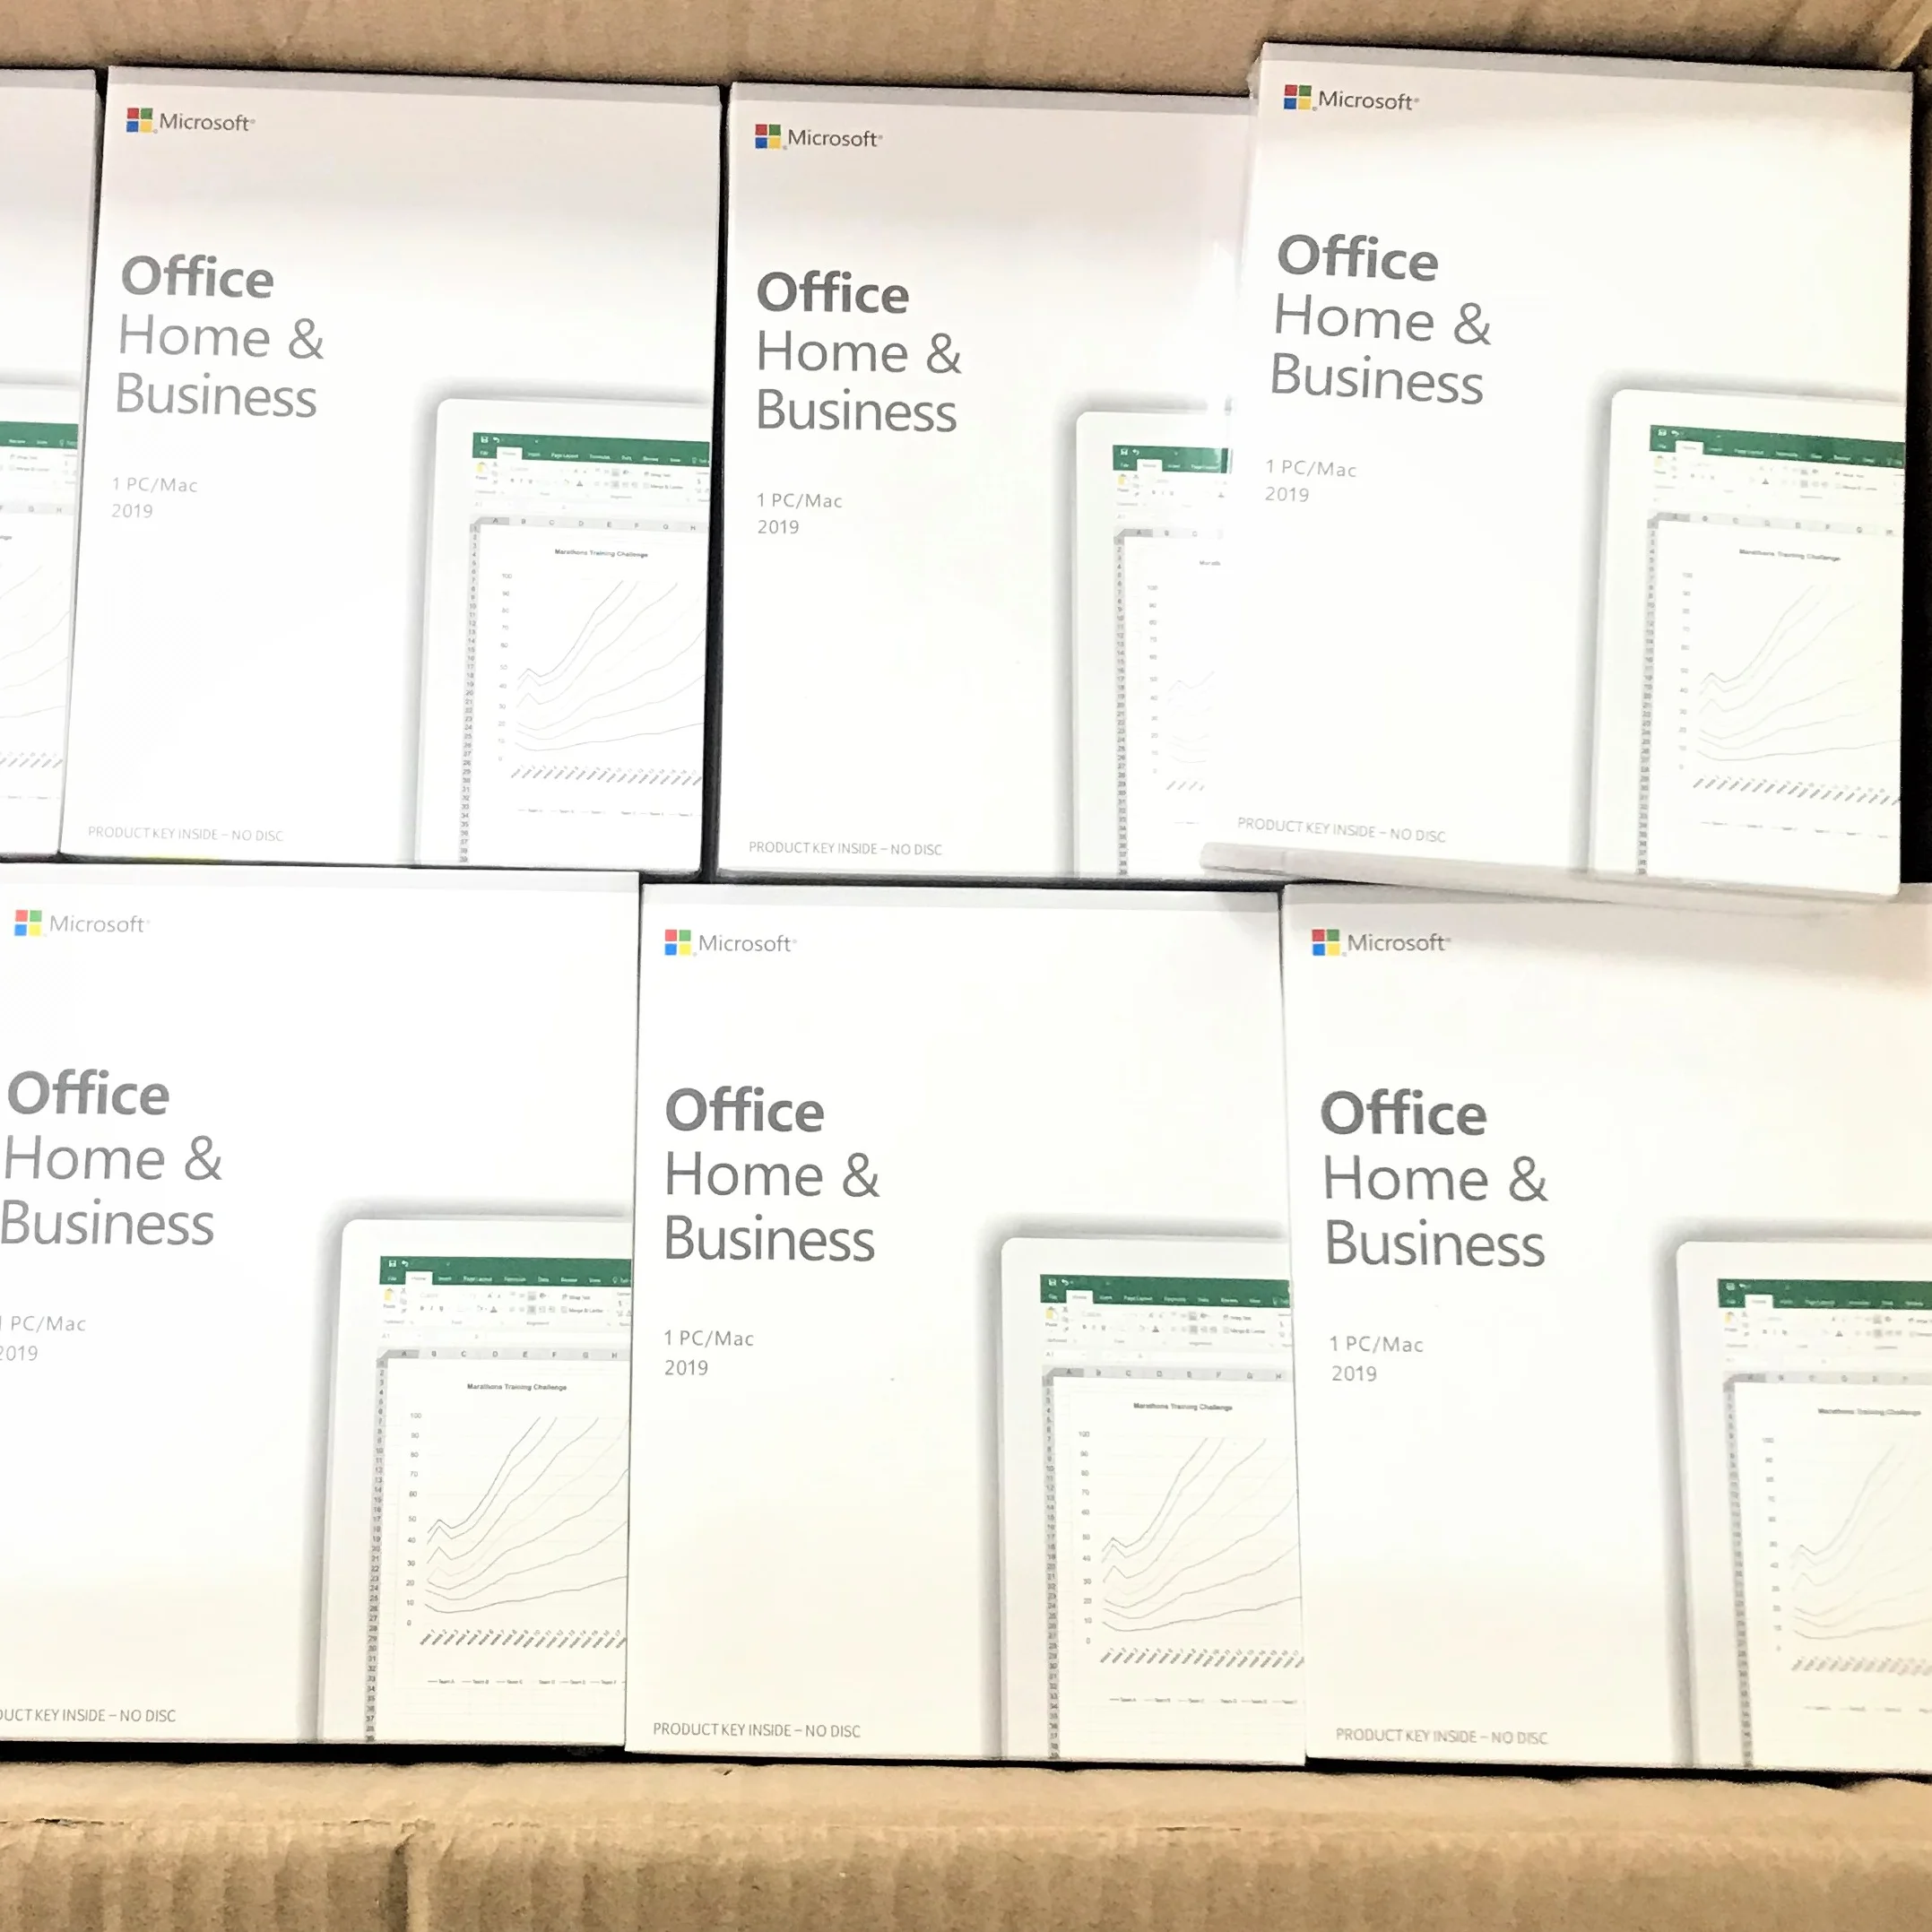 

Hot sale Retail Box Online Activation Lifetime warranty Microsoft Office 2019 Home and Business microsoft office 2019HB software